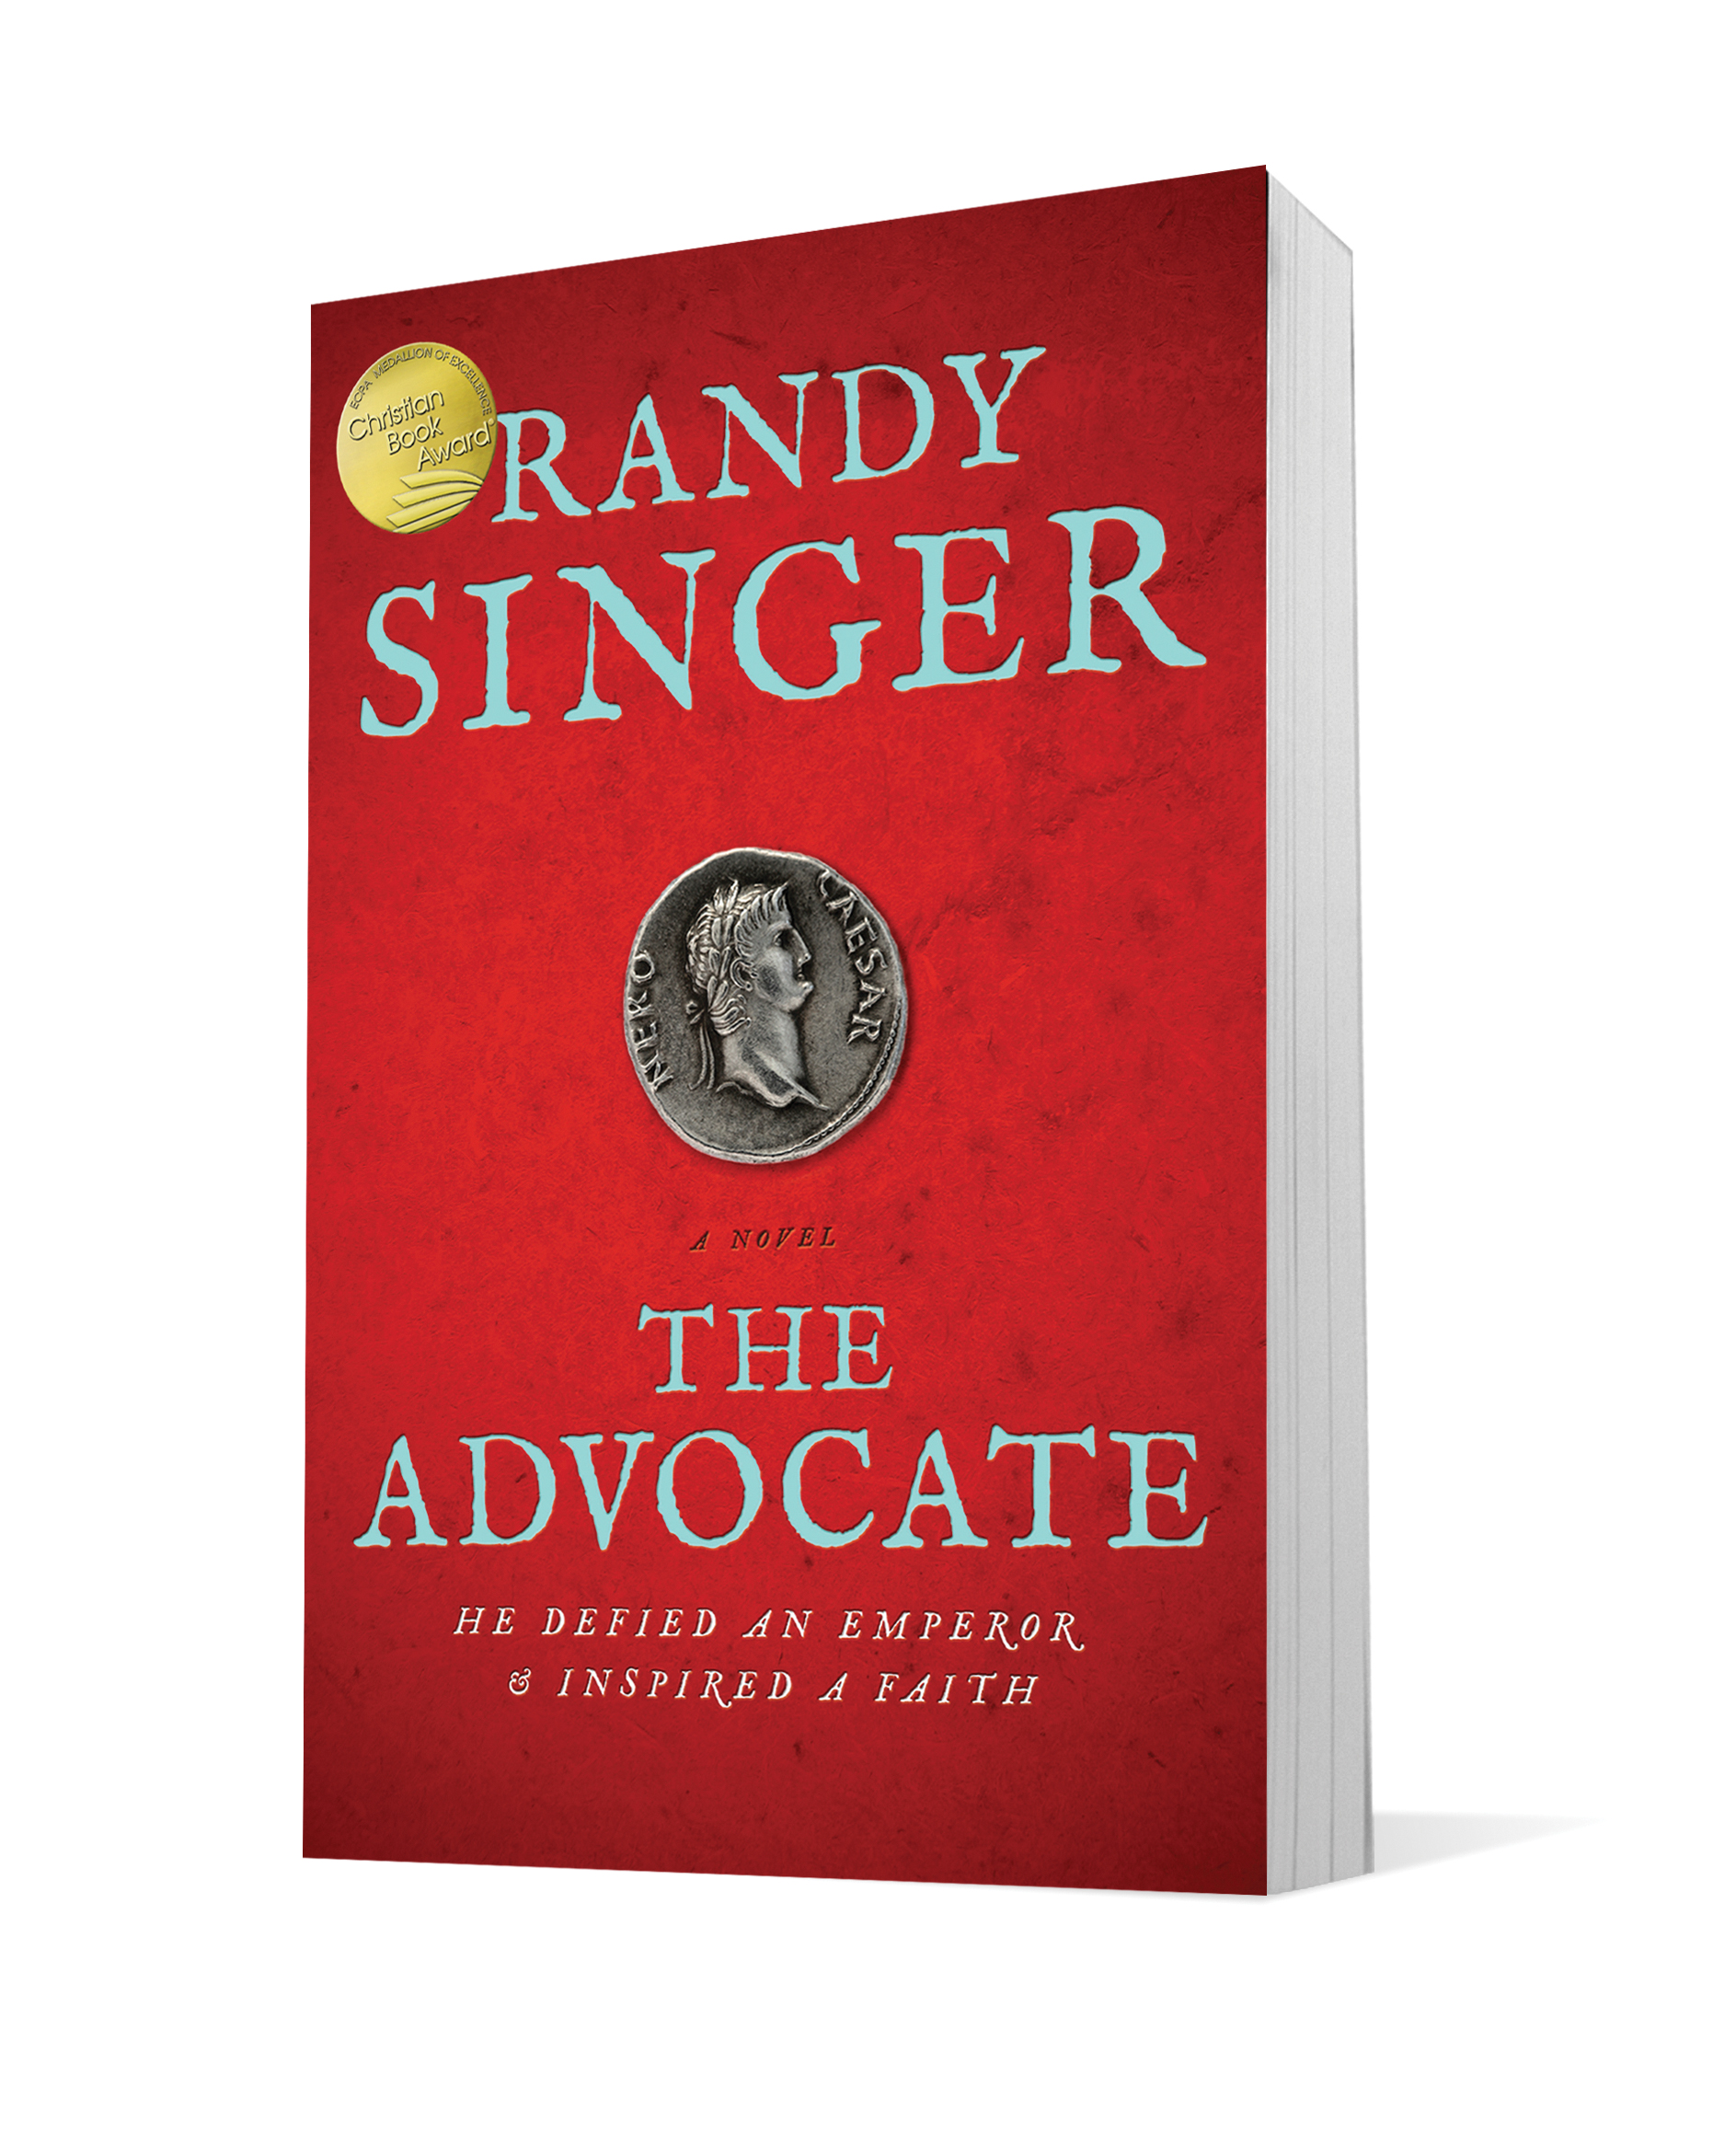 The award winning historical fiction novel The Advocate by bestselling Christian fiction author Randy Singer